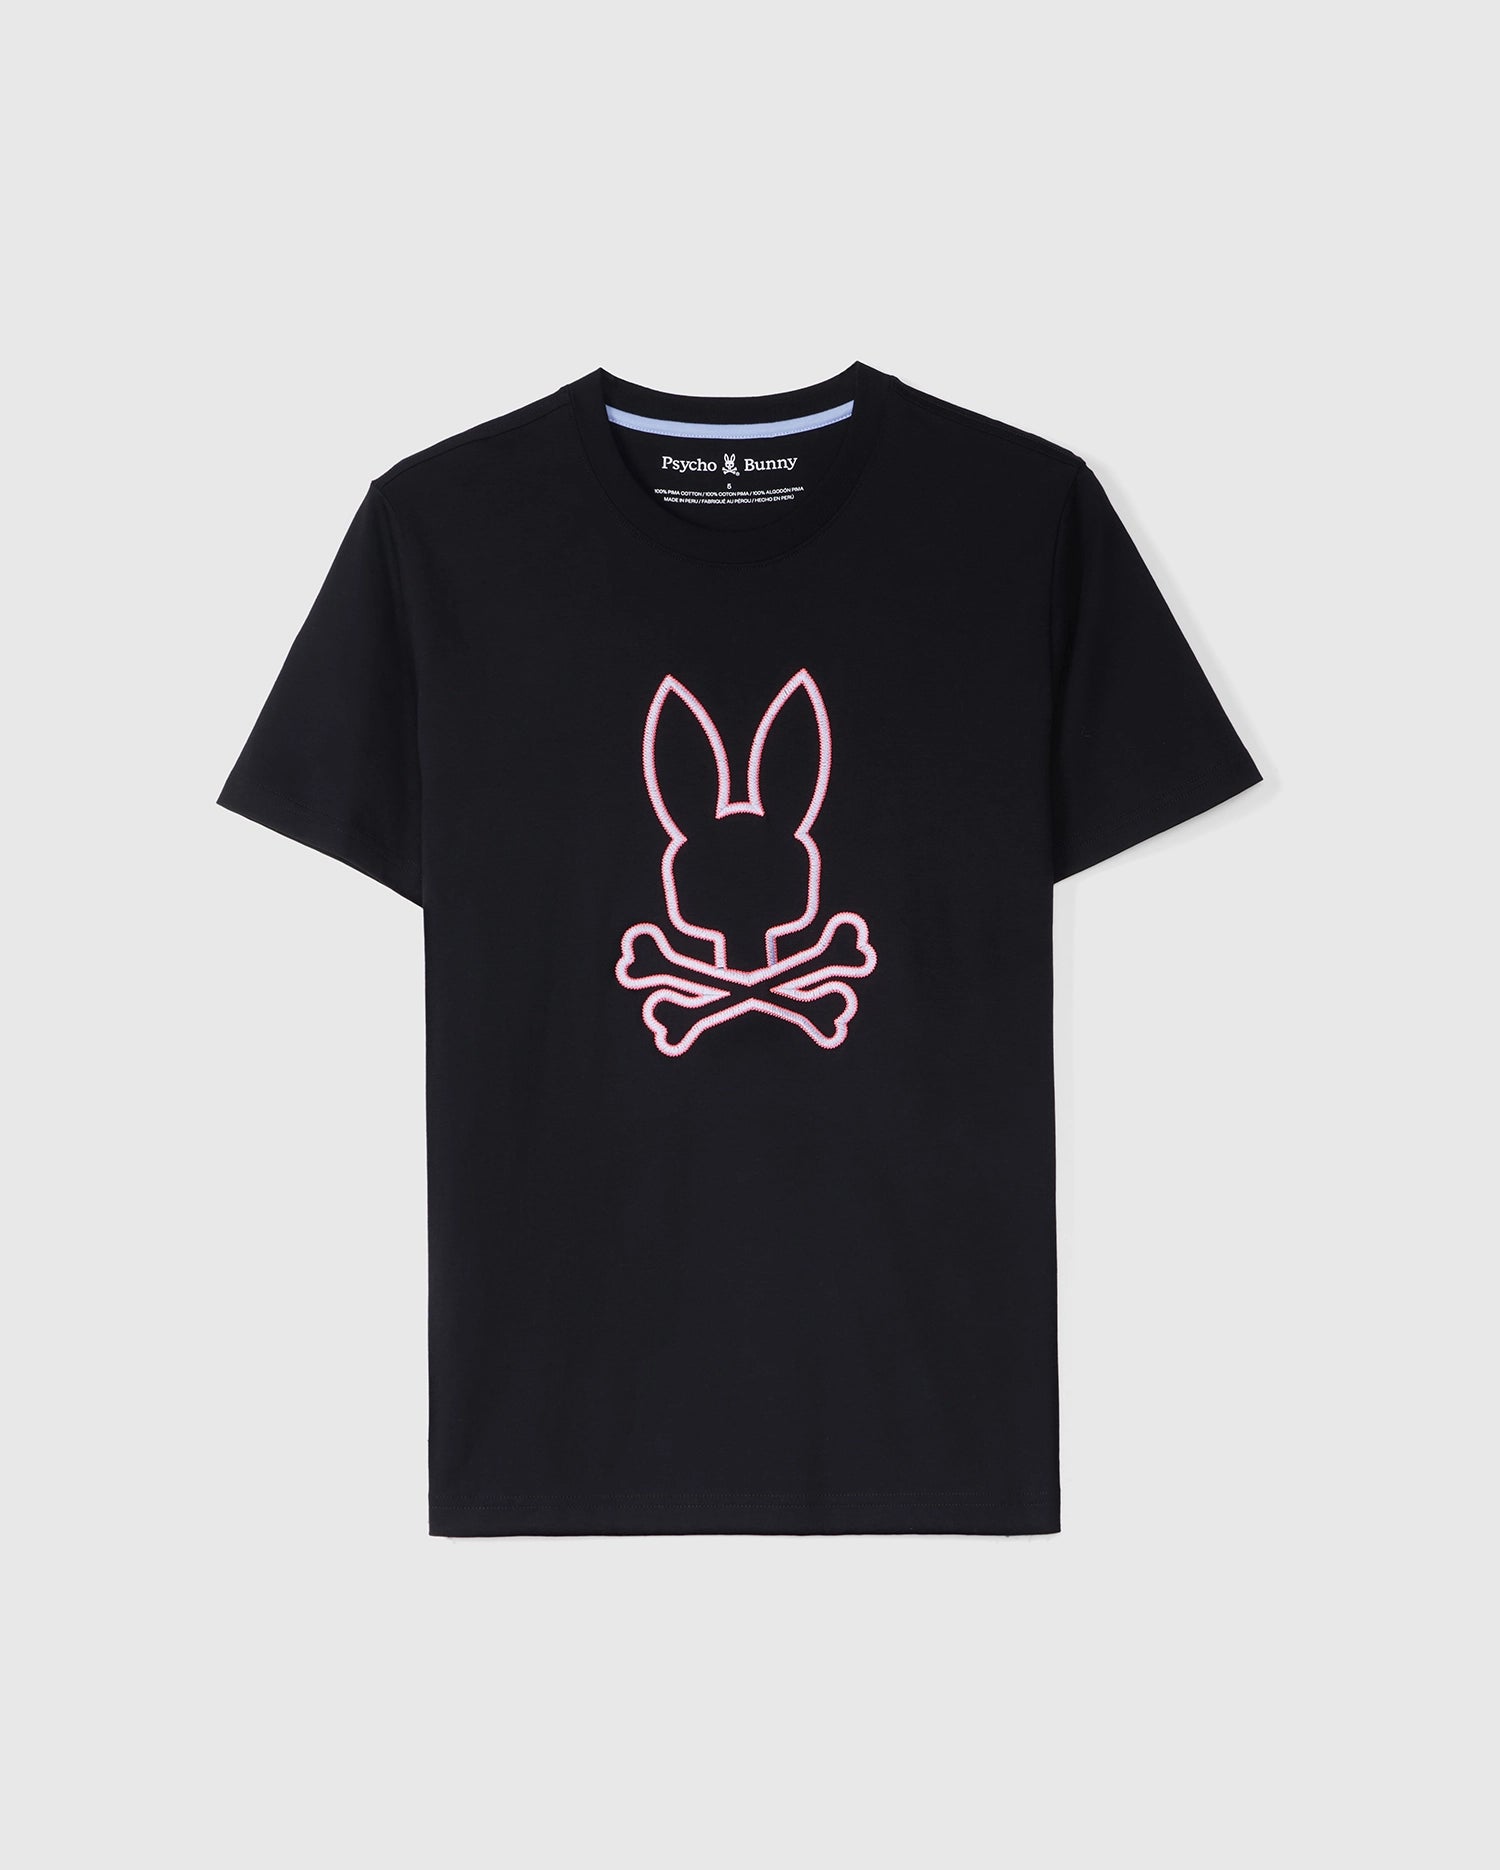 A black MENS FLOYD GRAPHIC TEE - B6U338B2TS featuring a stylized pink bunny head above crossbones graphic on the front. The centrally placed design stands out against the dark background, with an embroidered Bunny outline adding texture. The brand name 